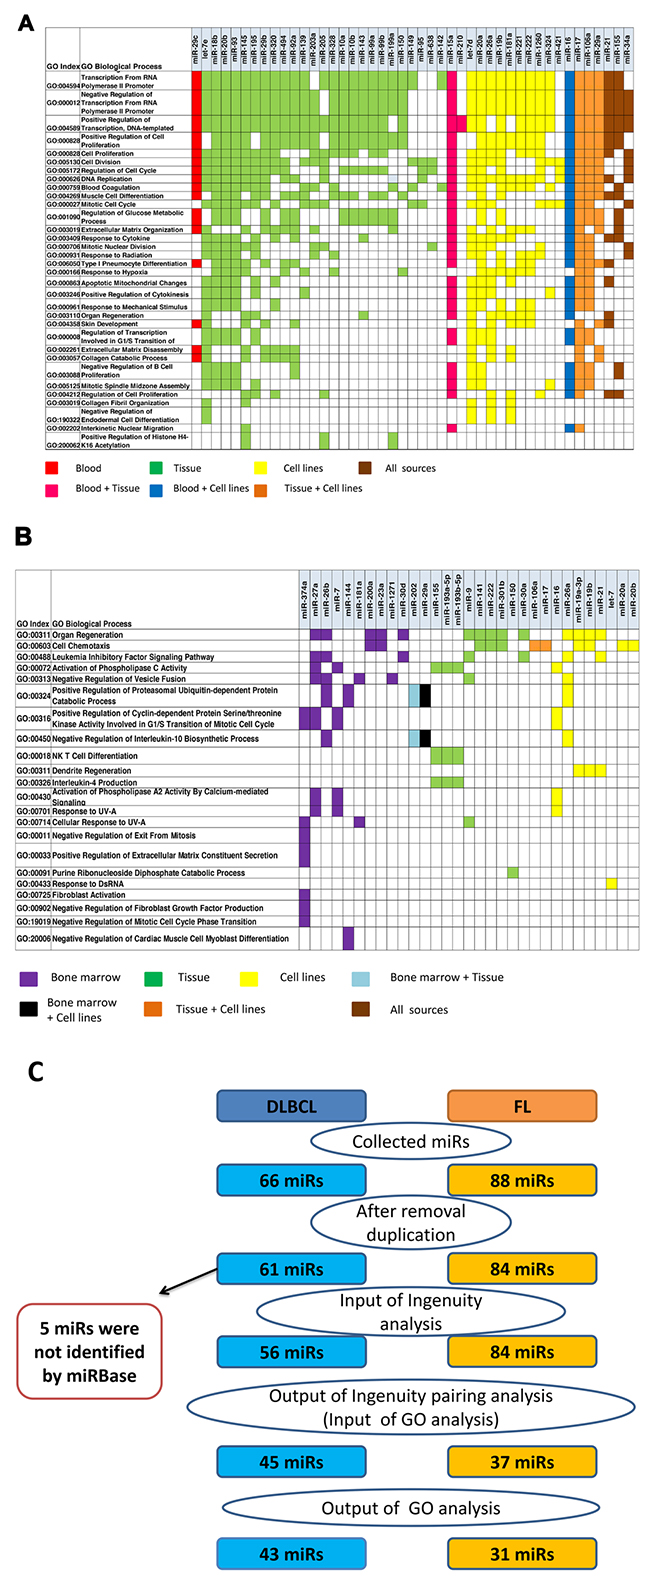 Ingenuity Pathways Analysis (IPA) pairing of miRs and gene groups that were significantly altered in DLBCL and FL were paired using gene ontology (GO) annotations associated with related miRNAs classified by their biological sources.